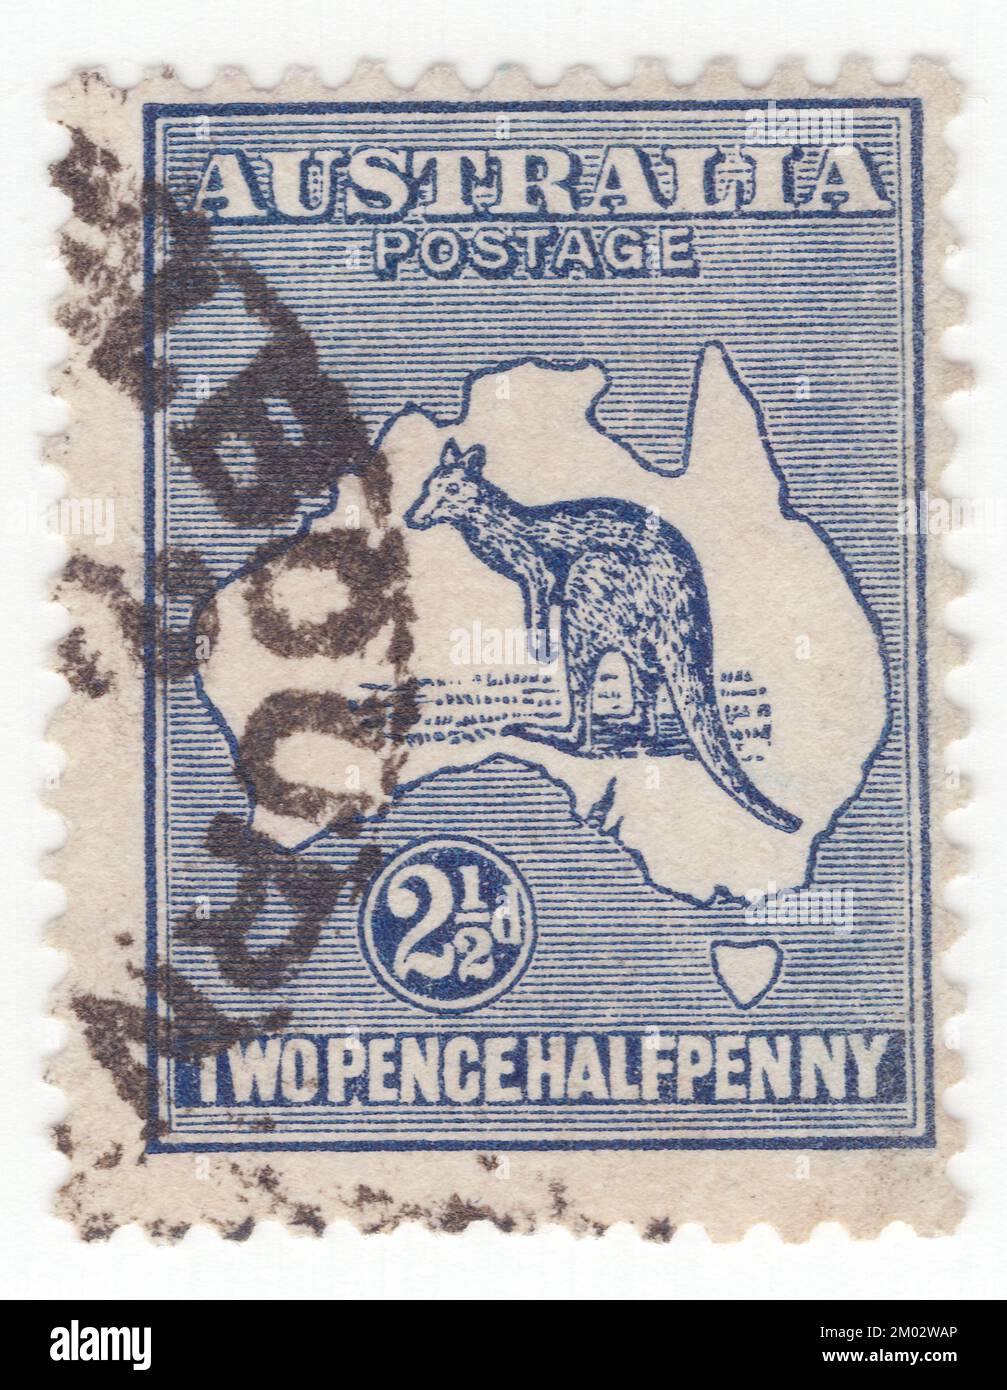 AUSTRALIA — 1913: An 2½ pences dark blue postage stamp depicting Kangaroo and Map of Australia. Australia is the oldest, flattest, and driest inhabited continent, with the least fertile soils. It is a megadiverse country, and its size gives it a wide variety of landscapes and climates, with deserts in the centre, tropical rainforests in the north-east, and mountain ranges in the south-east. The kangaroo is a recognizable symbol of Australia. First Australian postage stamps issue. The kangaroo and emu feature on the Australian coat of arms Stock Photo